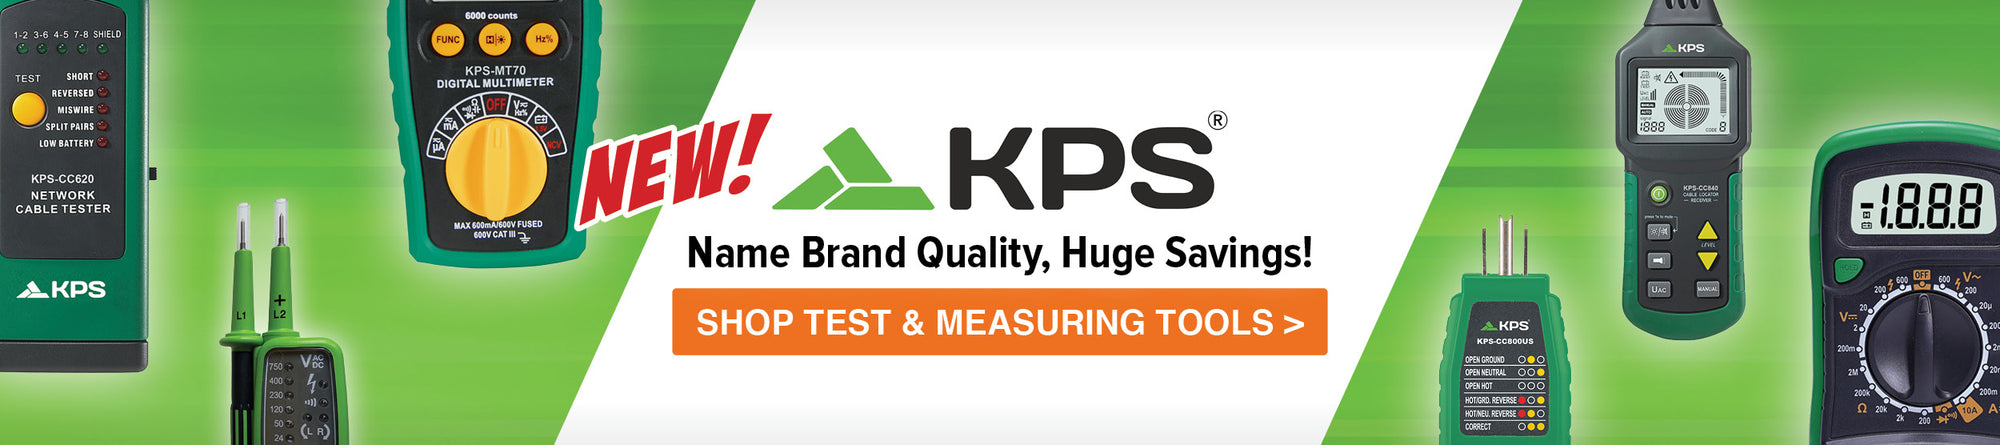 KPS Test and Measuring Tools